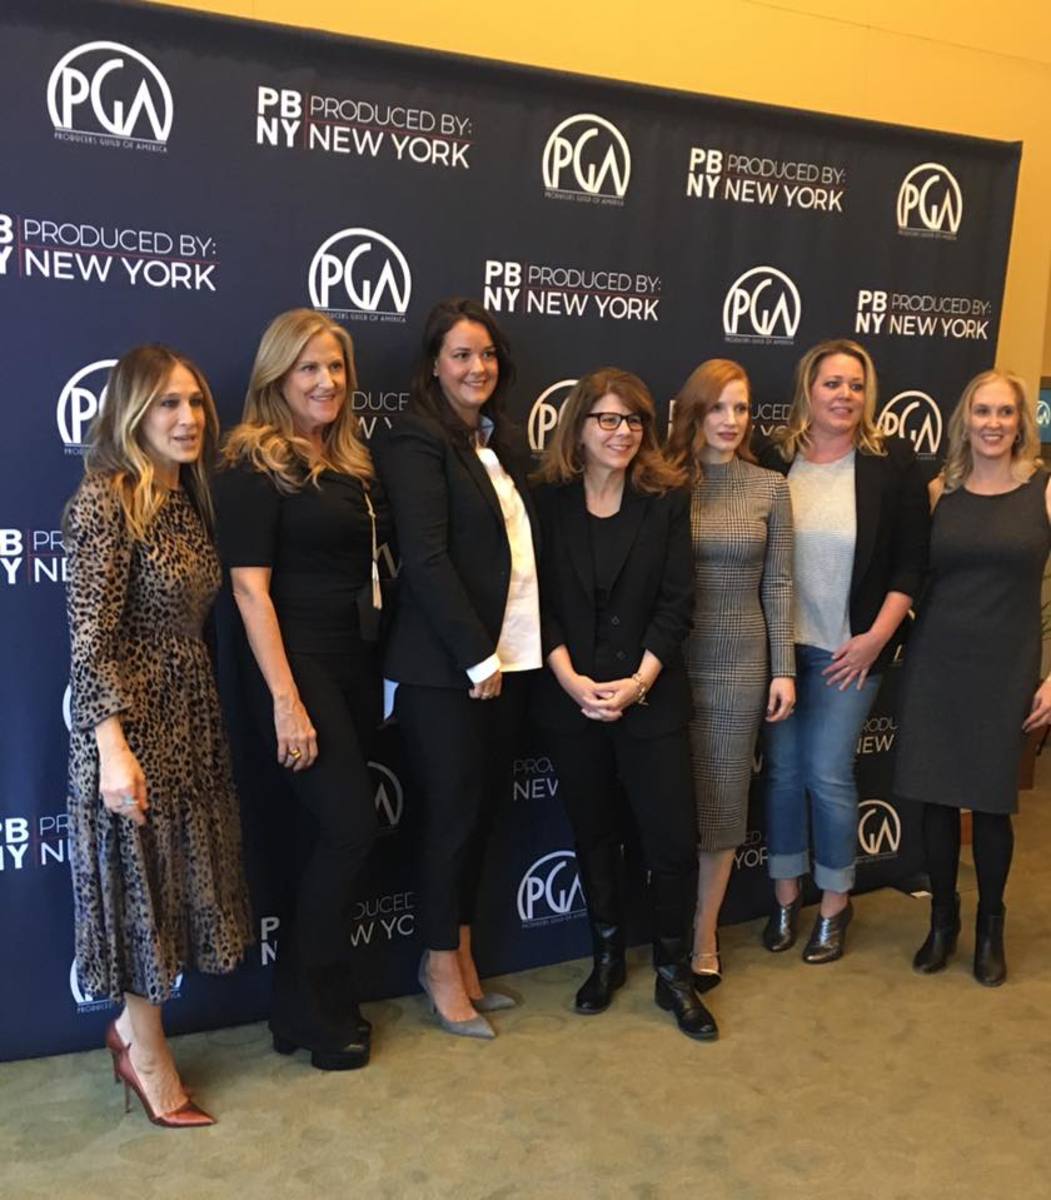 Script shares the highlights from some of the top panels at the Producers Guild of America's Produced By Conference in New York City.